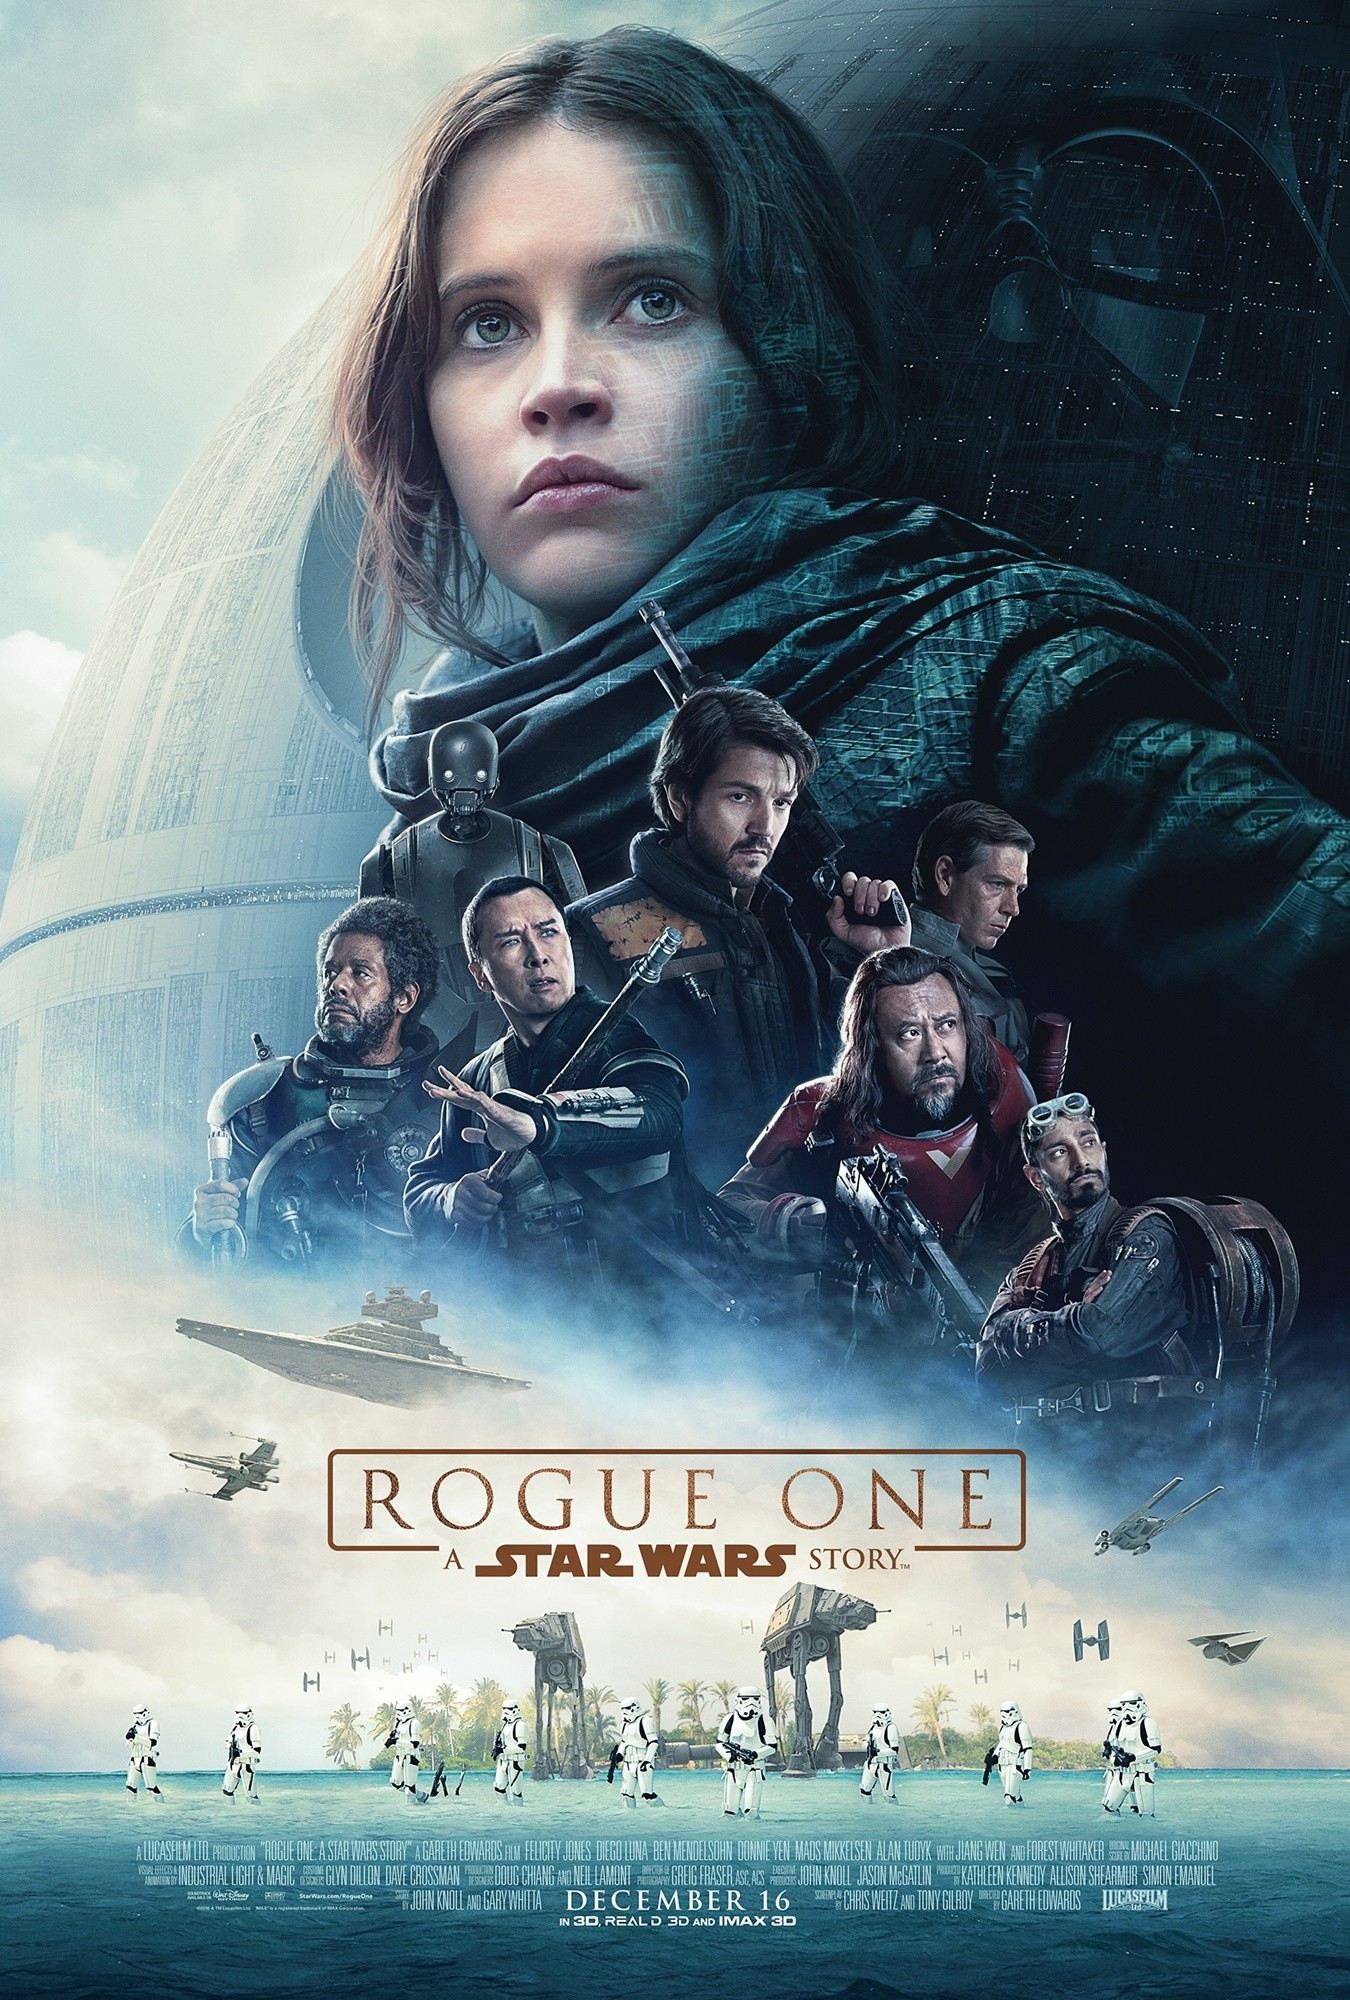 instaling Rogue One: A Star Wars Story